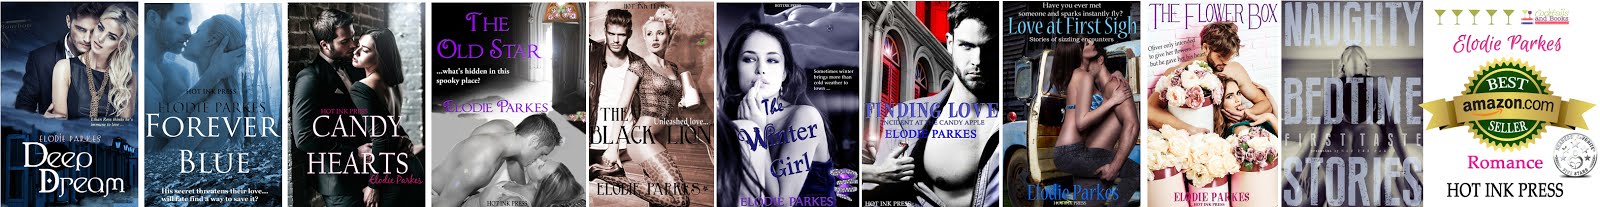 Elodie Parkes, erotic romance from Hot Ink Press on KU